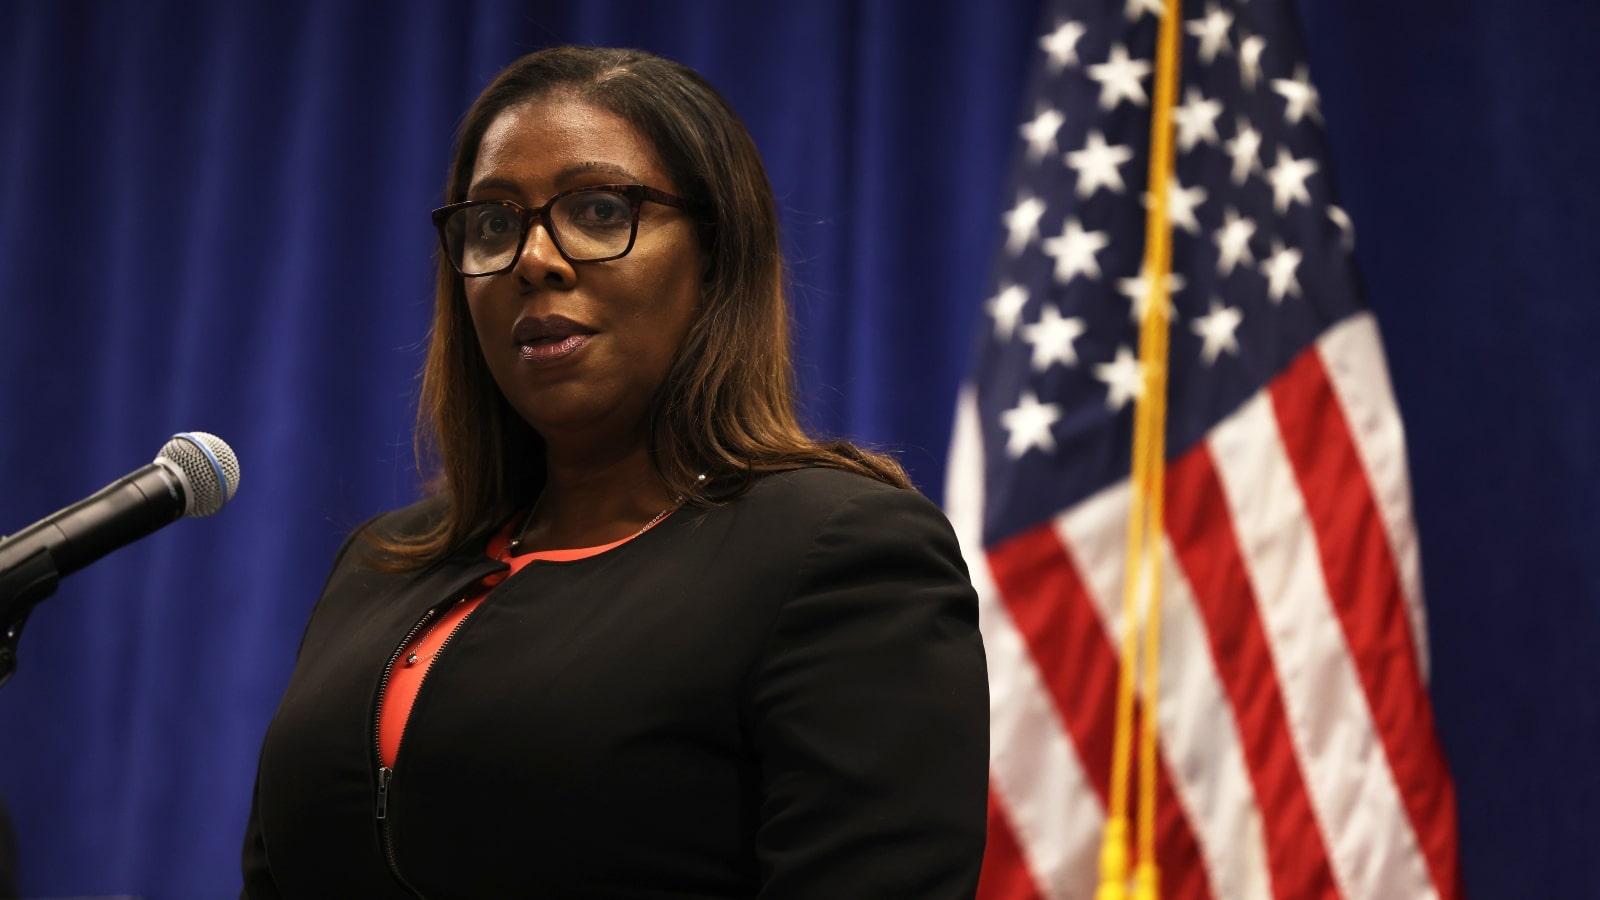 Letitia James Called Out Anew Over Campaign Video Pledging to ‘Get Trump’ – Trump News Today